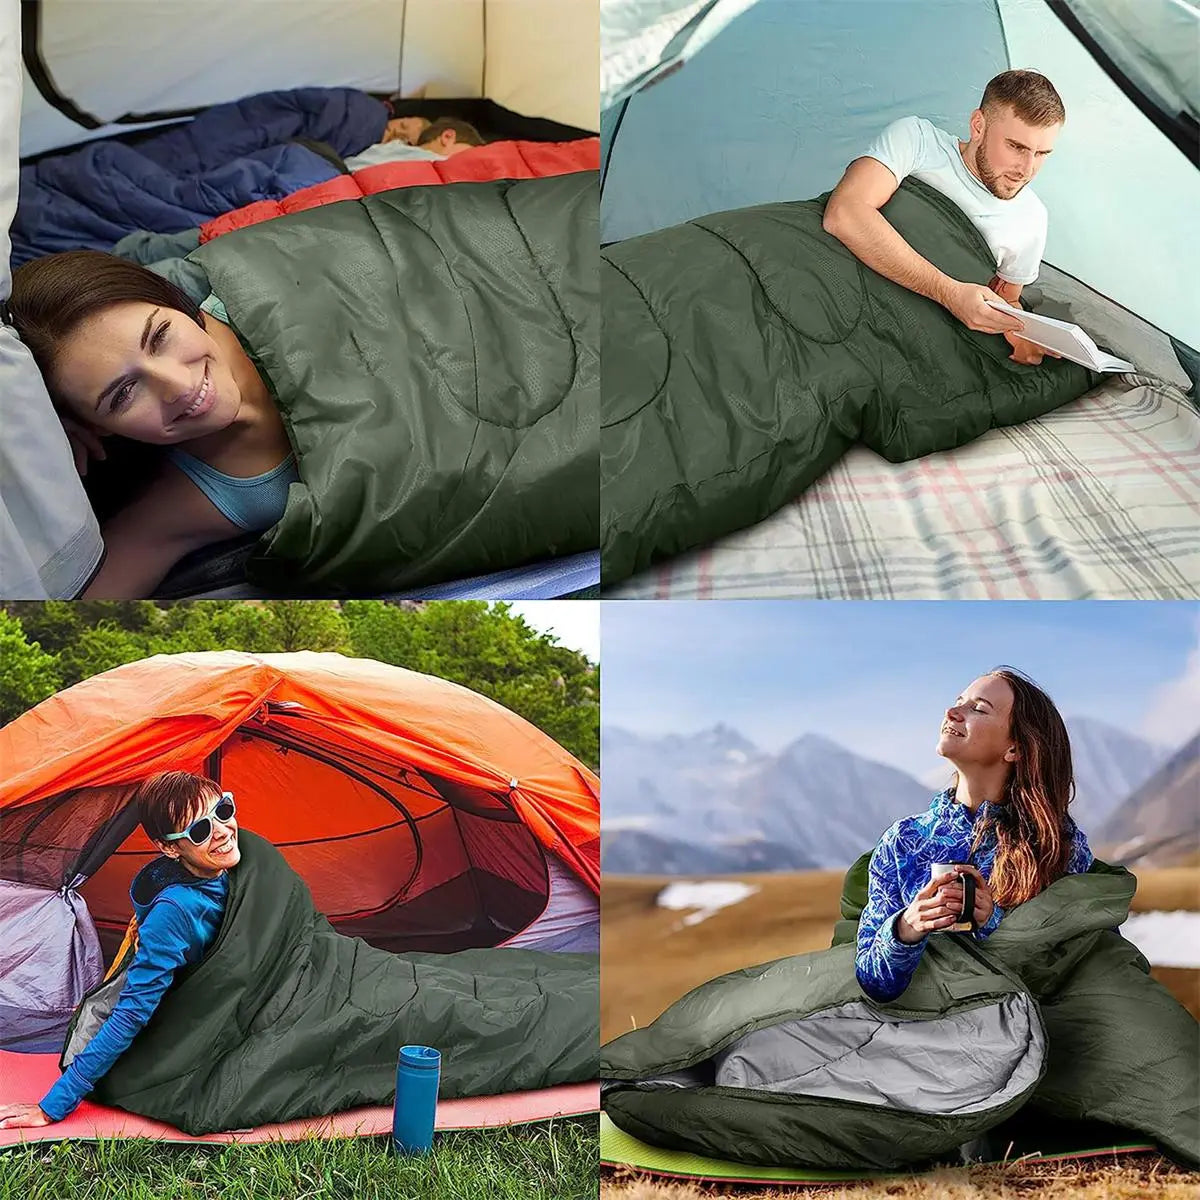 Portable Sleeping Bag, Music Festival Lightweight Sleeping Bag for Kids (1 Piece), Adults, Girls, Women, Ultra-Fine Fiber Filling Sleeping Bag with Compression Bag for Camping, Hiking, Climbing, Solocamping, Bikepacking, Glamping